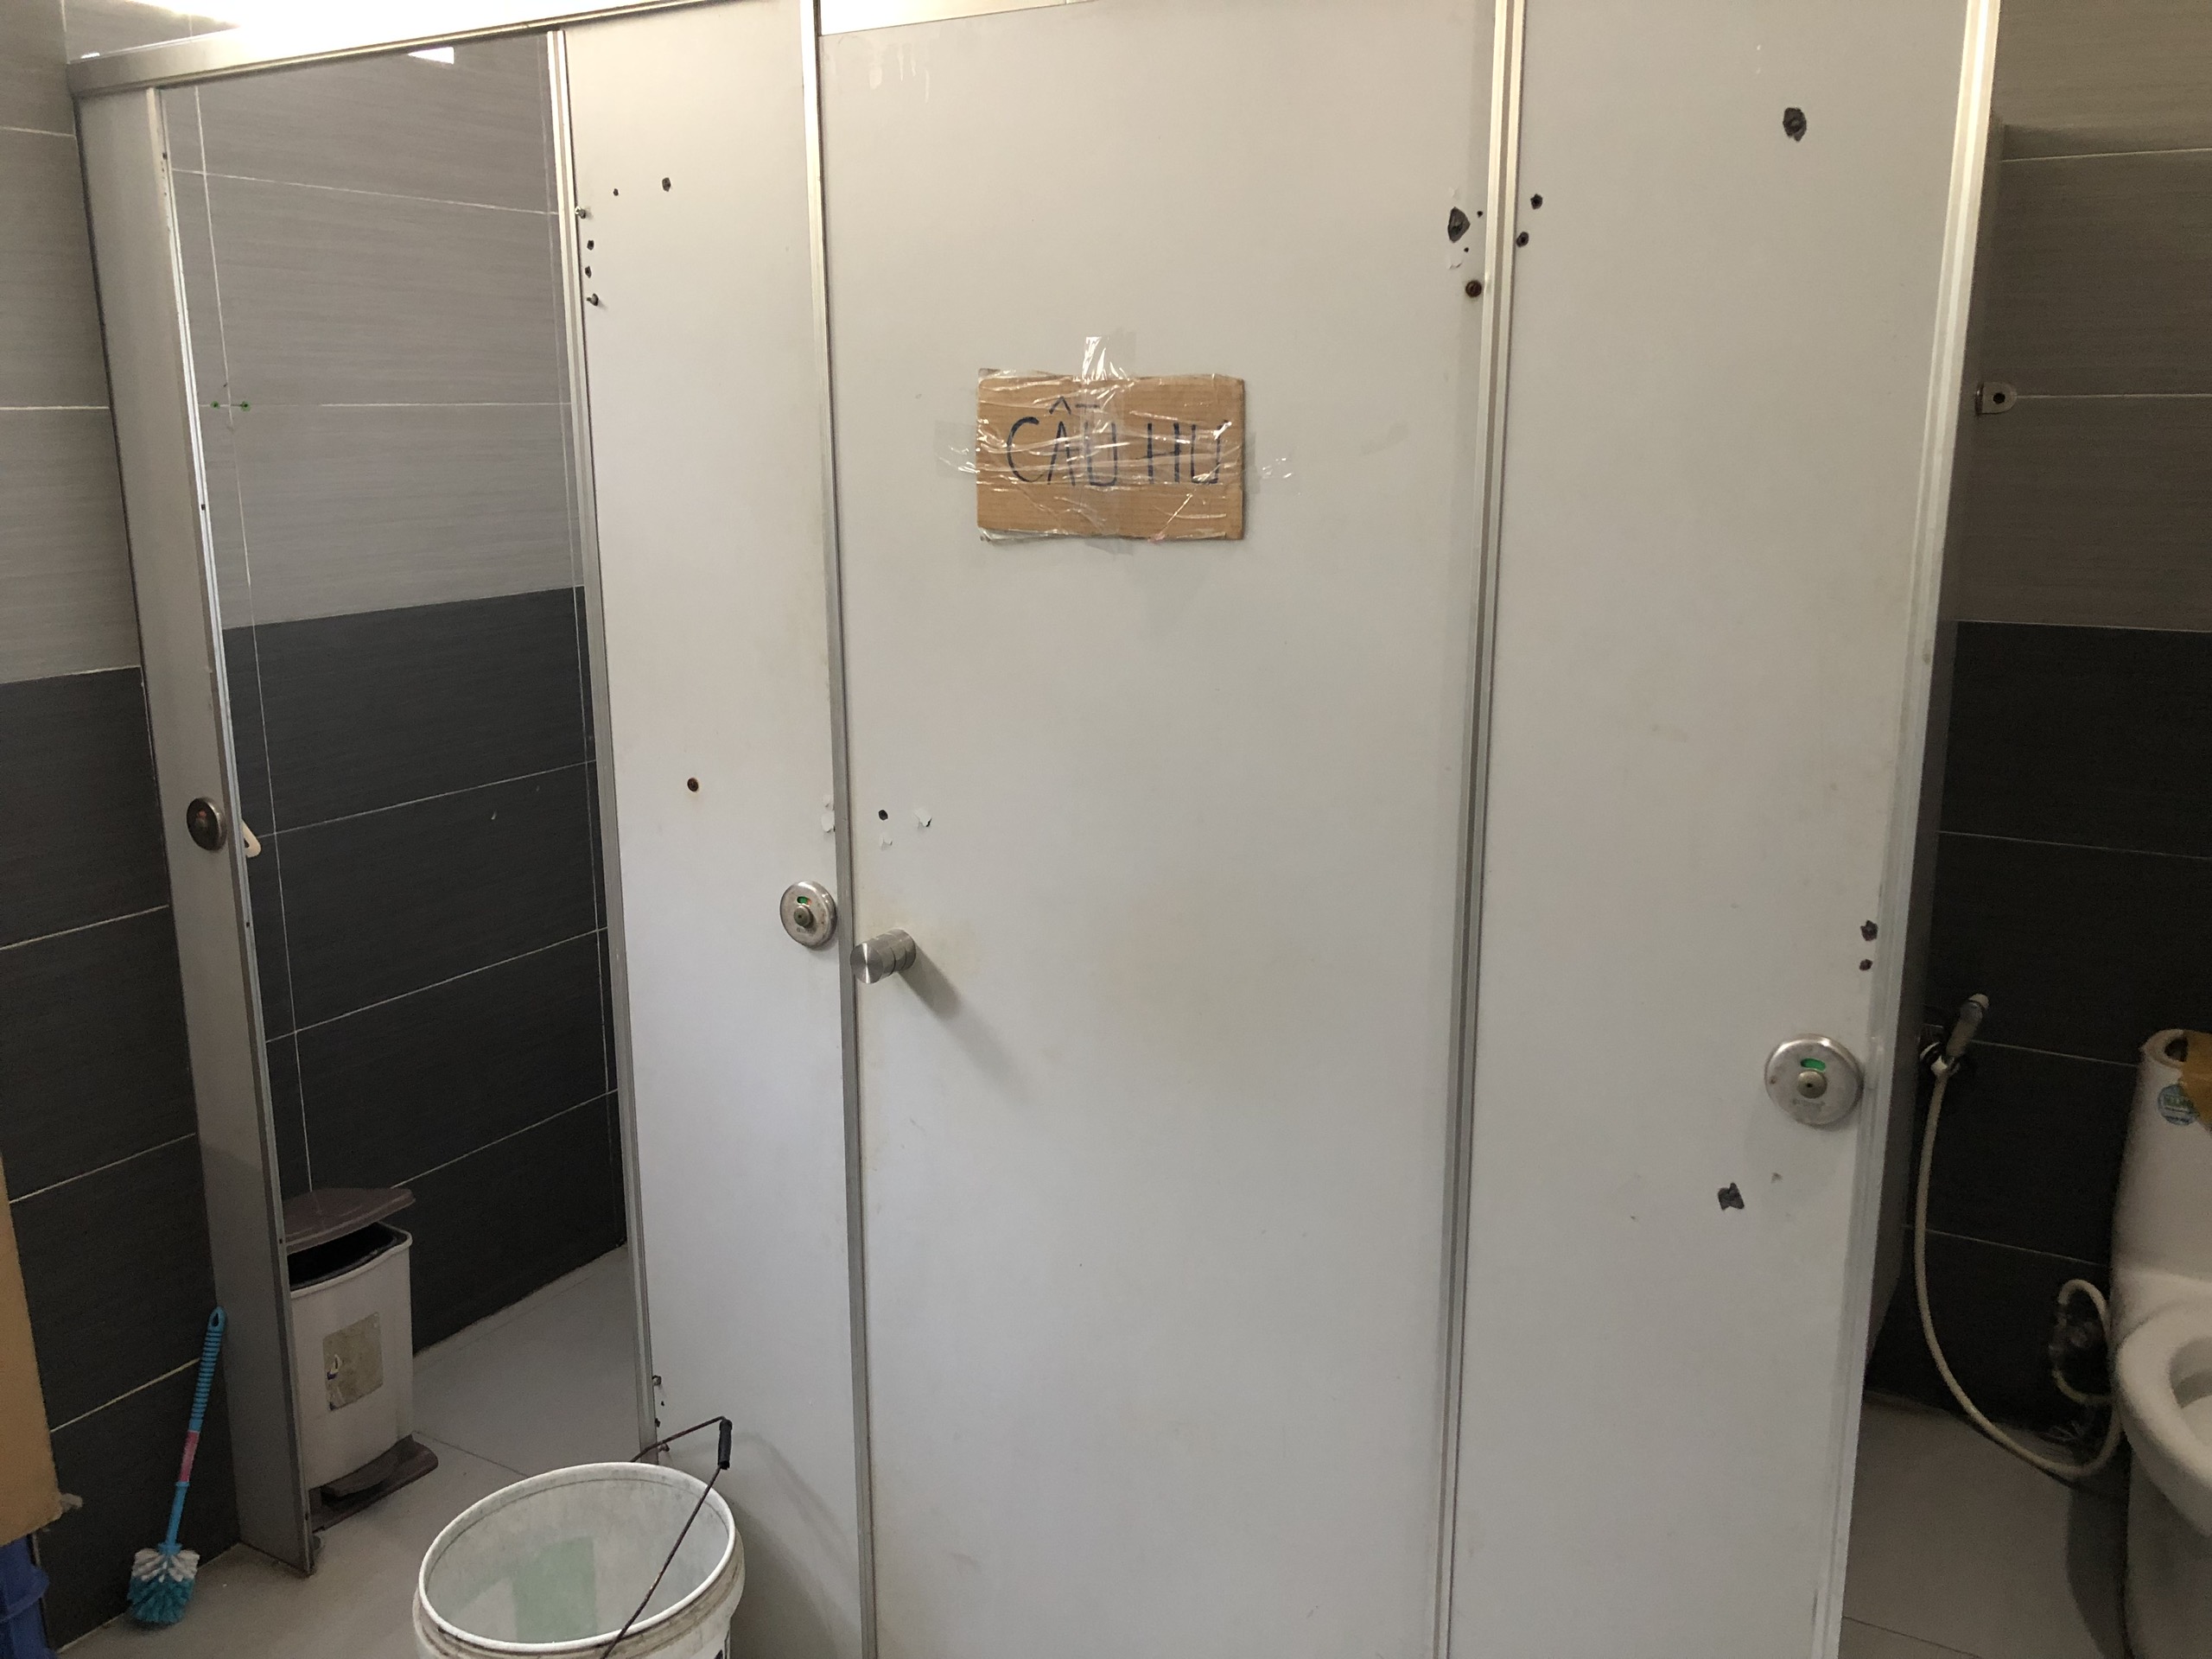 A malfunctioning toilet stall is closed at the Saigon Railway Station in Ho Chi Minh City. Photo: Luu Duyen / Tuoi Tre